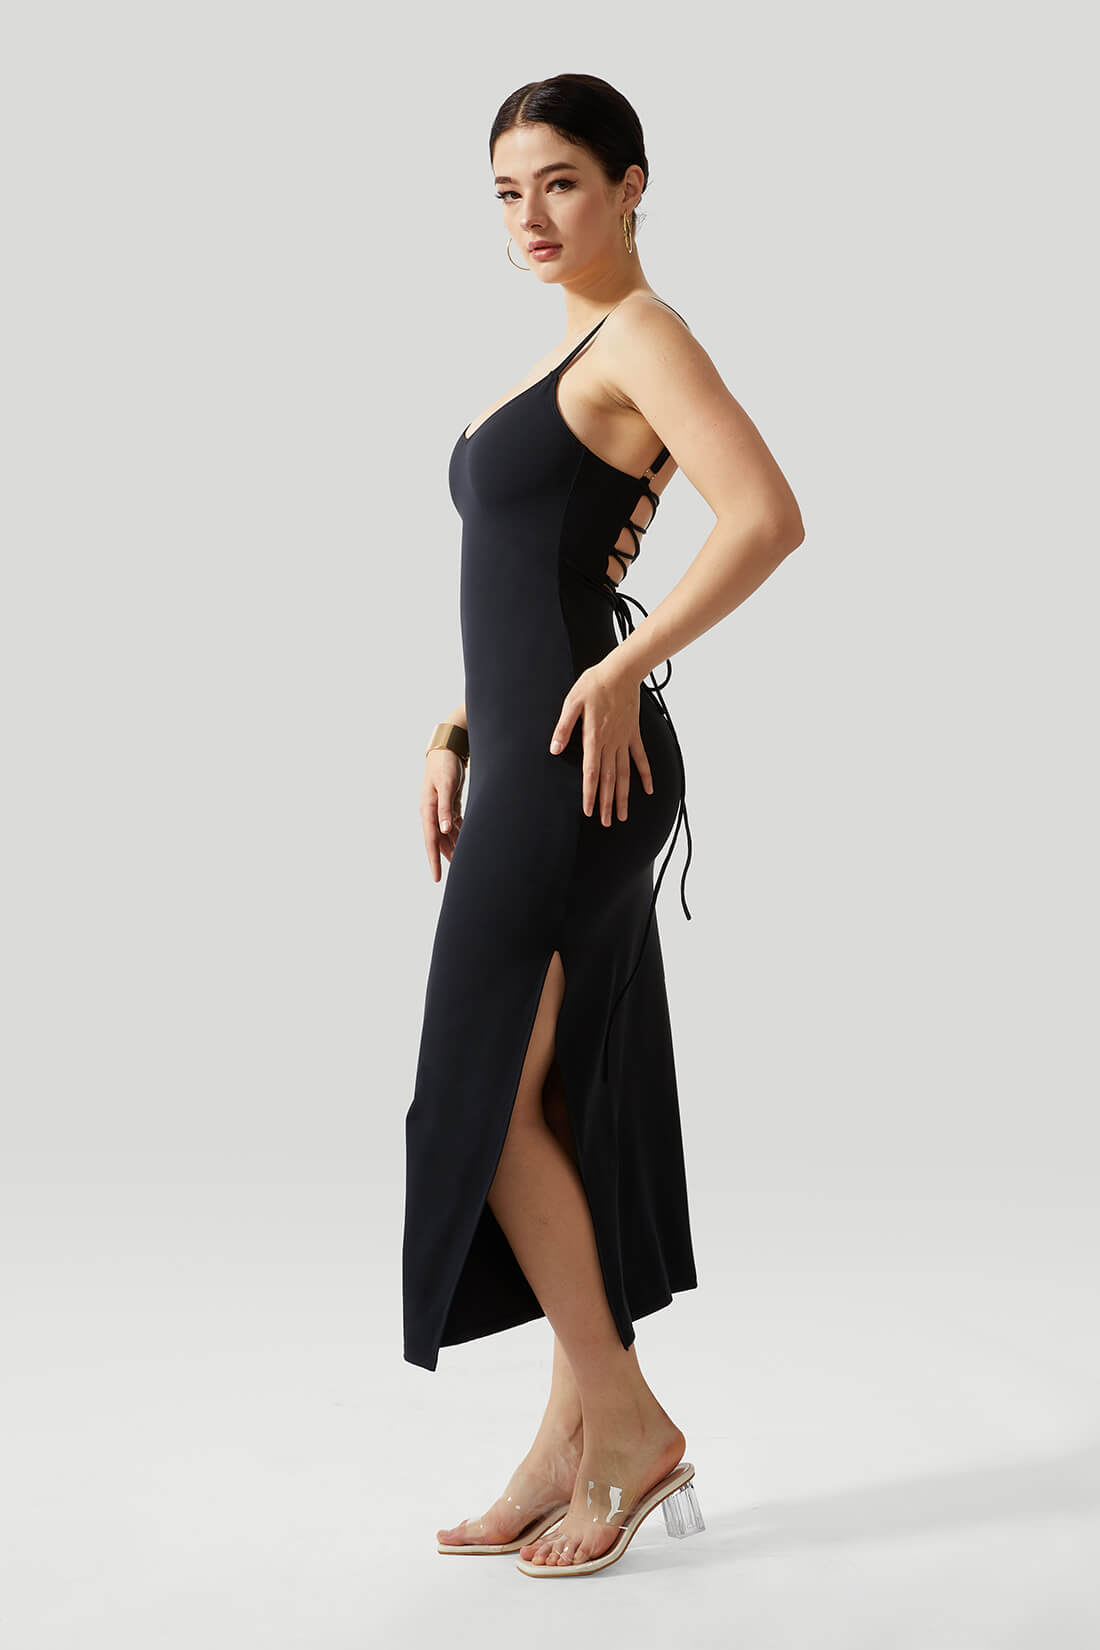 Solid Sleeveless Dress With Built in Shapewear